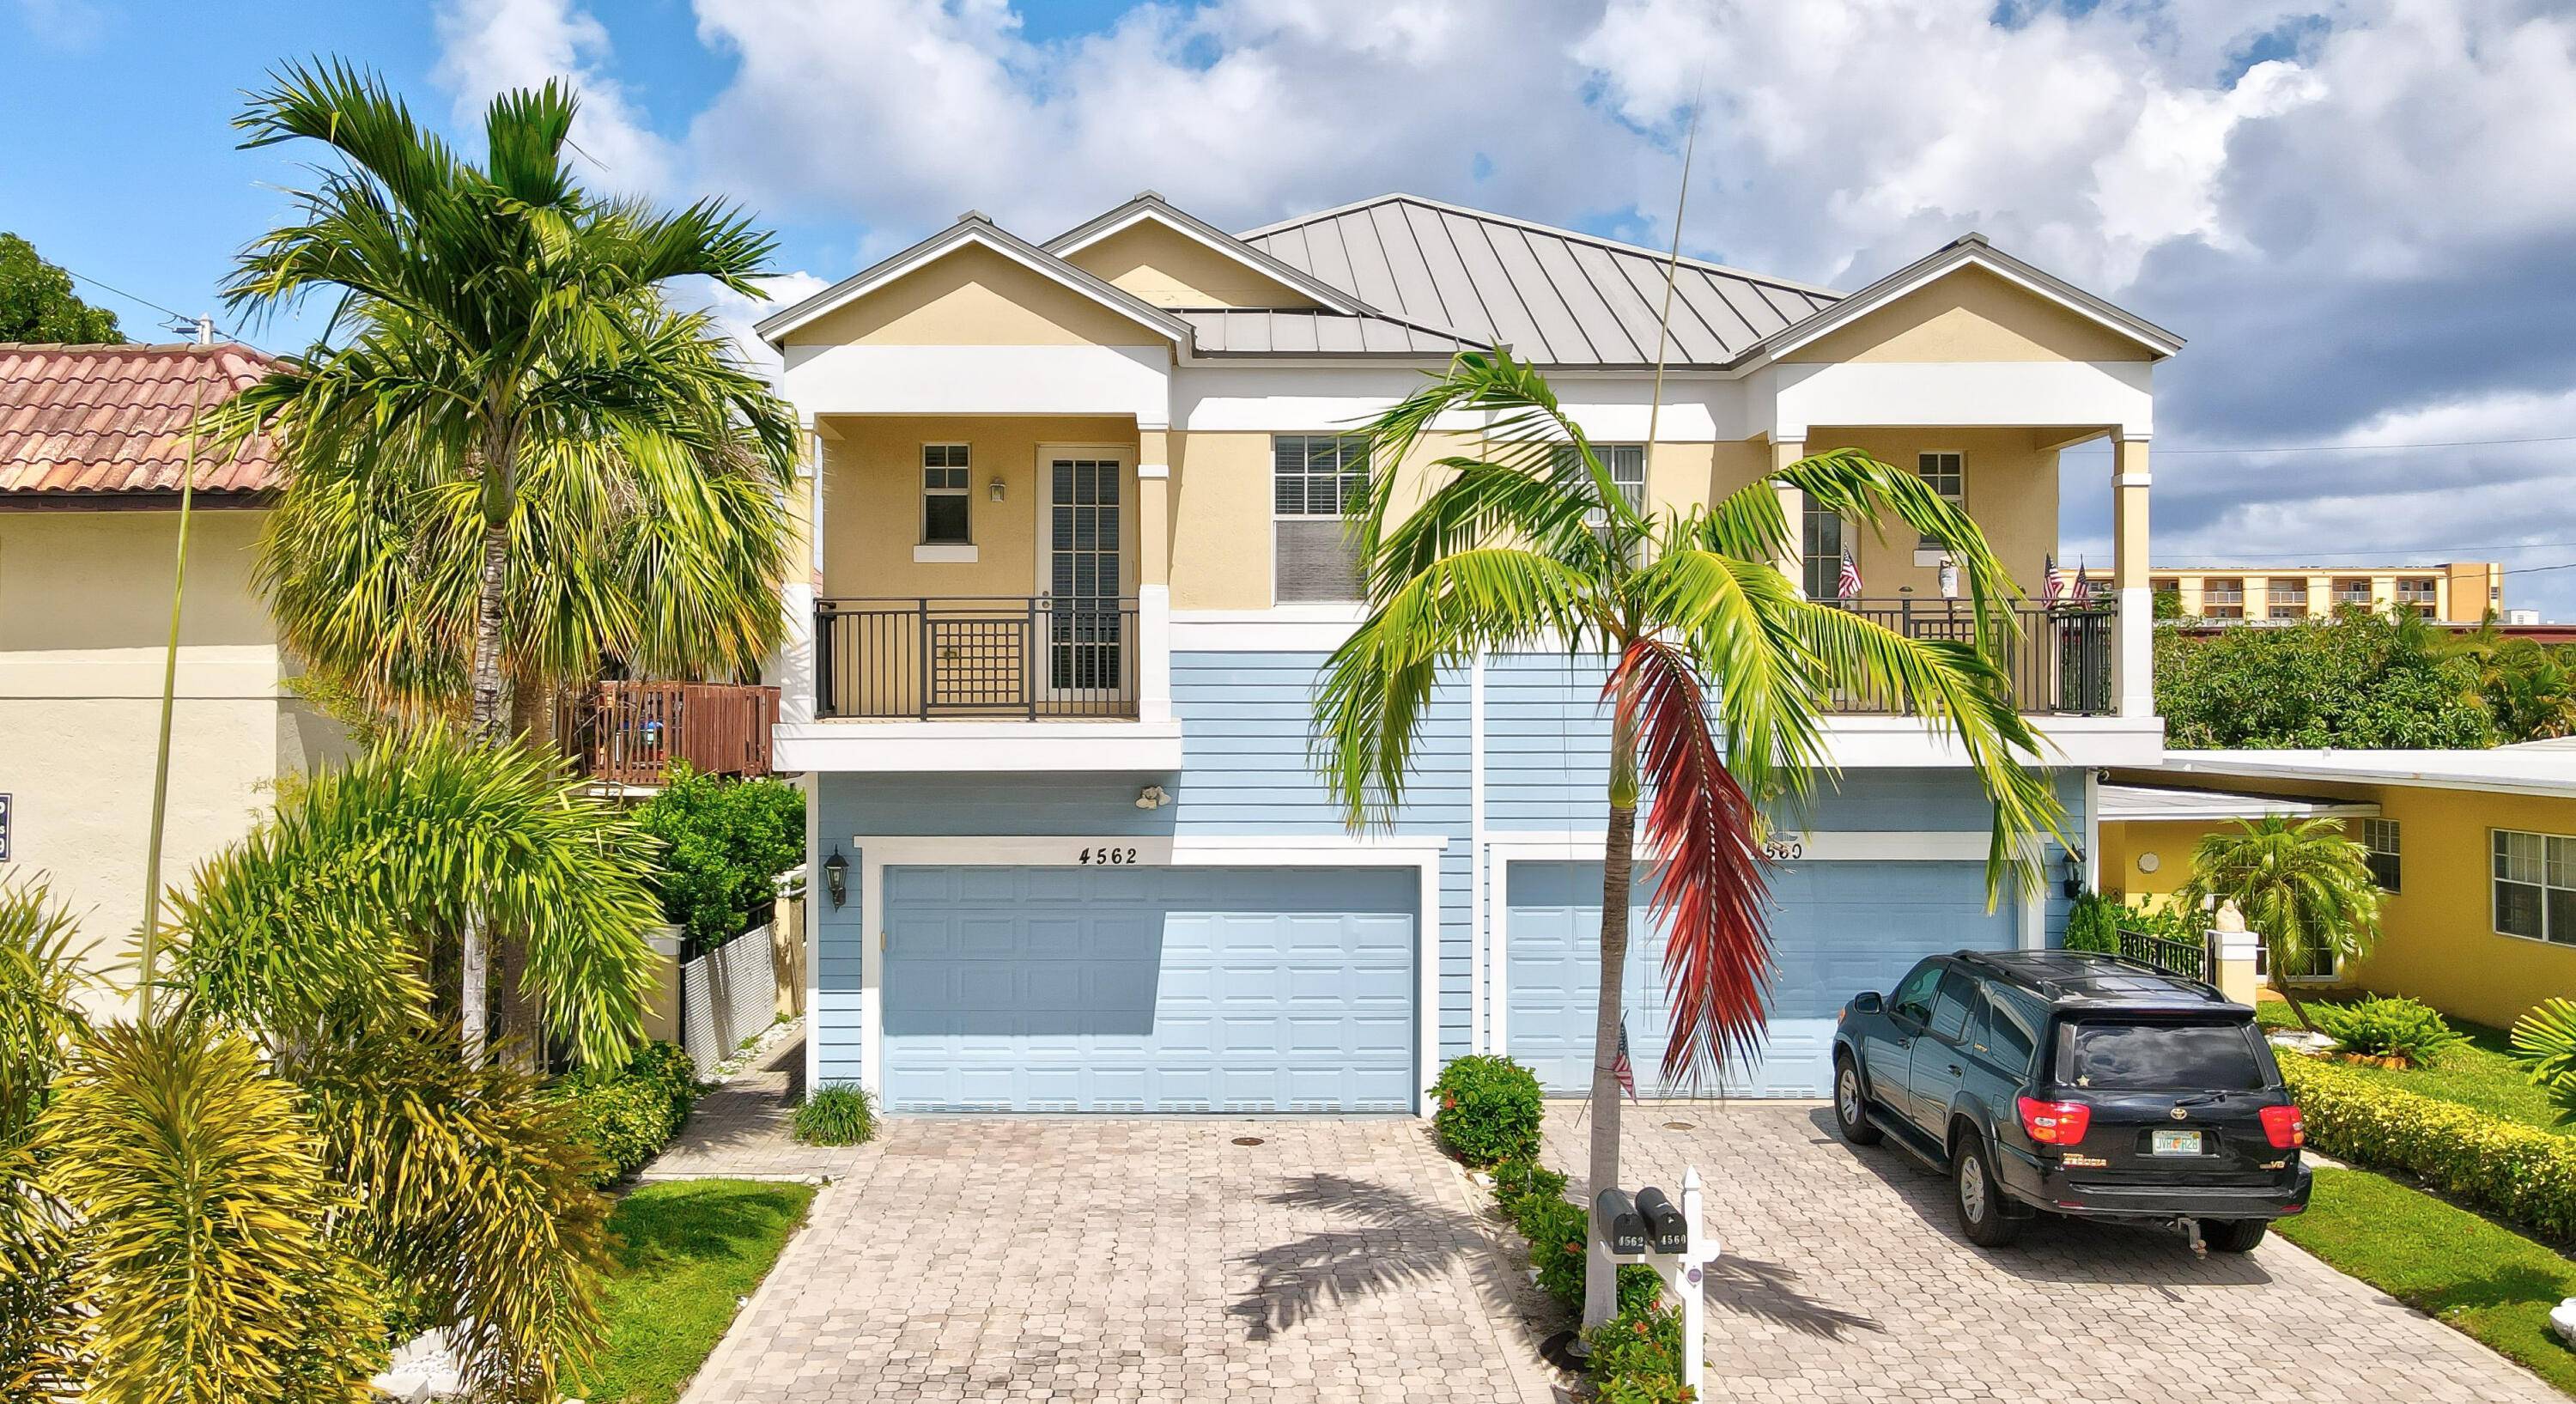 LOCATED 2 BLOCKS FROM THE BEAUTIFUL LAUDERDALE BY THE SEA BEACH, this gorgeous, fully furnished 3 bedroom each with own bathroom, single family attached home is available February 1st, 2024.